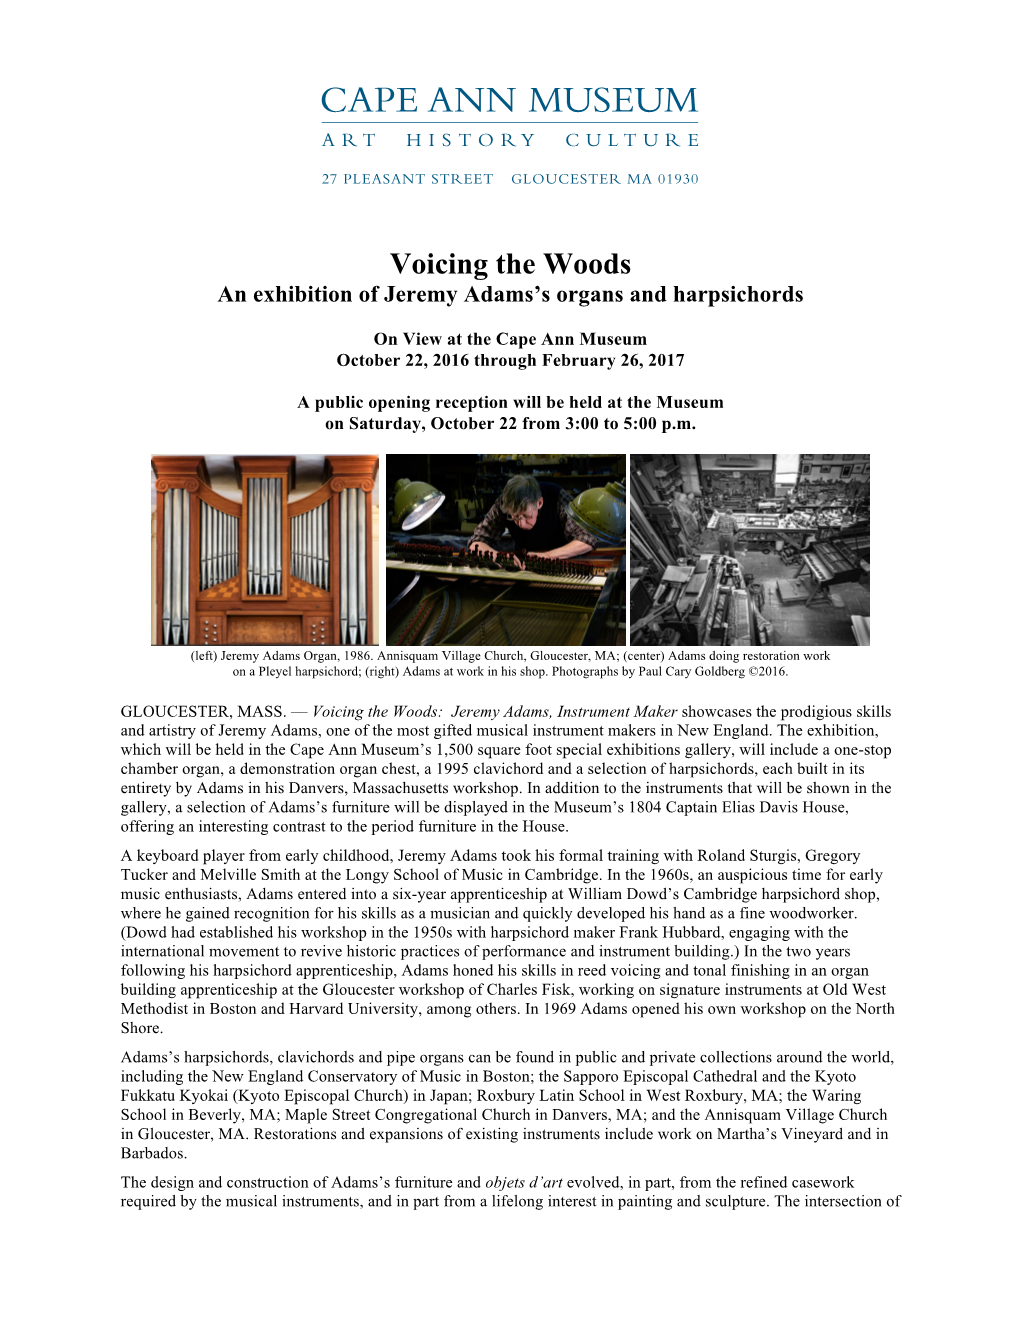 Voicing the Woods an Exhibition of Jeremy Adams’S Organs and Harpsichords